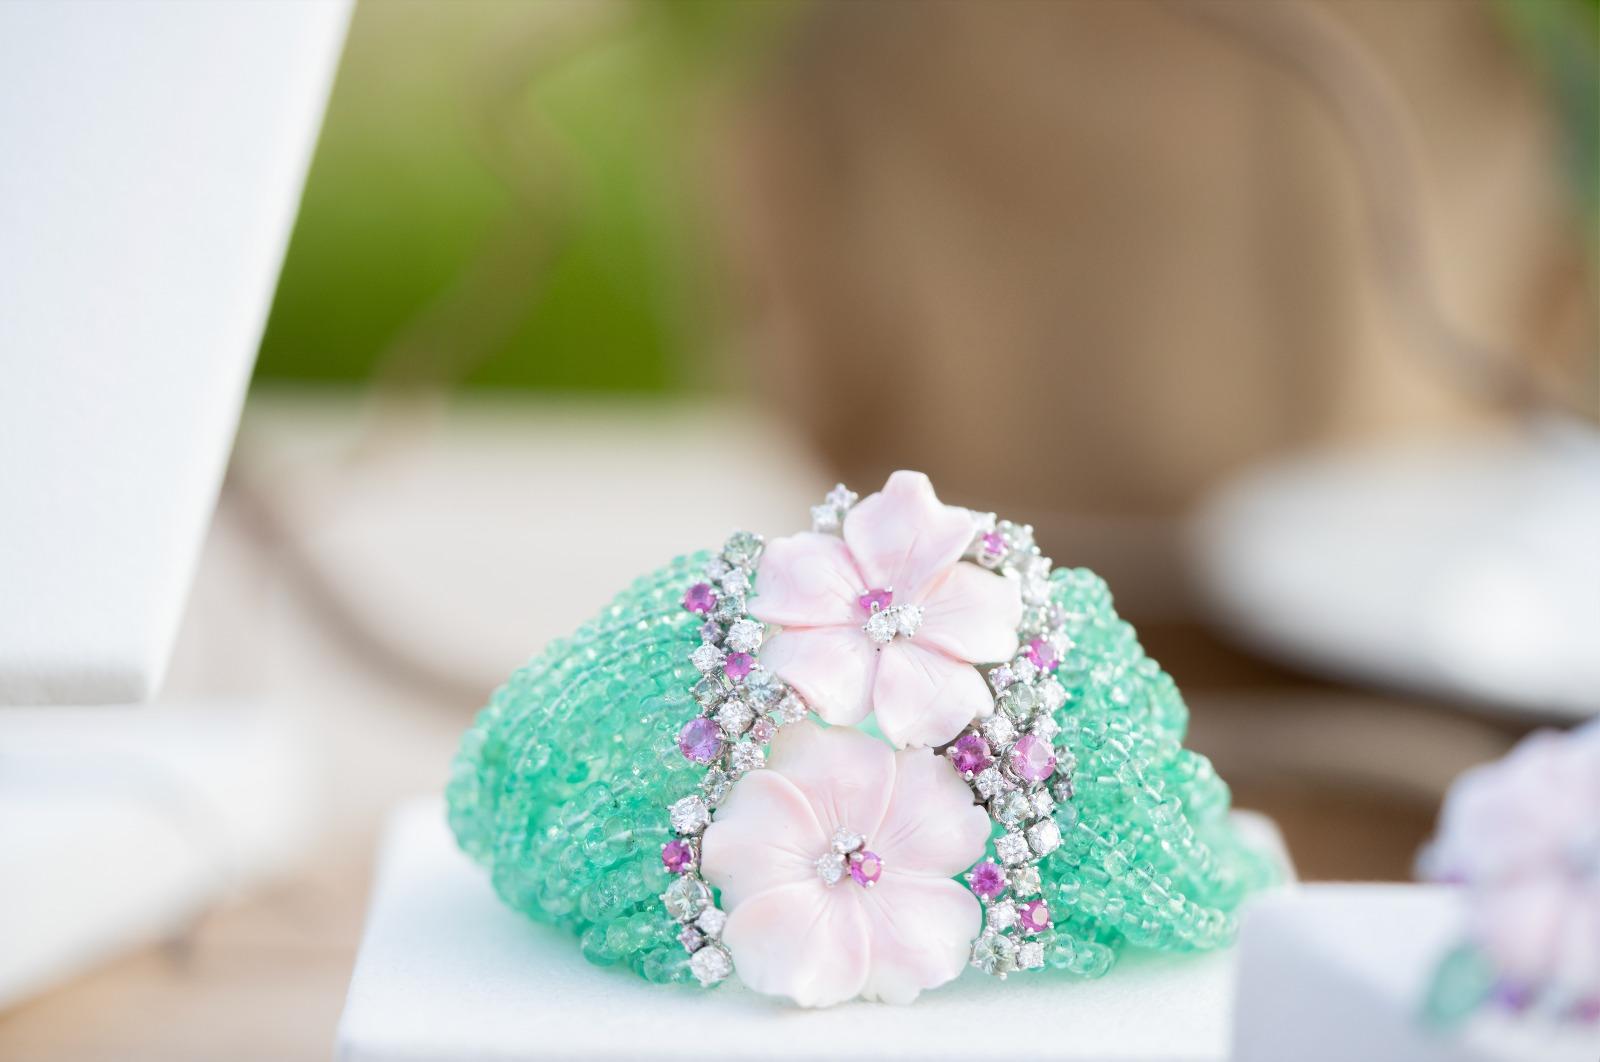 Introducing the exquisite FIORINA EMERALD BRACELET, a masterpiece crafted with white gold, adorned with lustrous emerald beads threads, and embellished with delicate pink shell flowers. Each link of this enchanting bracelet features round brilliant